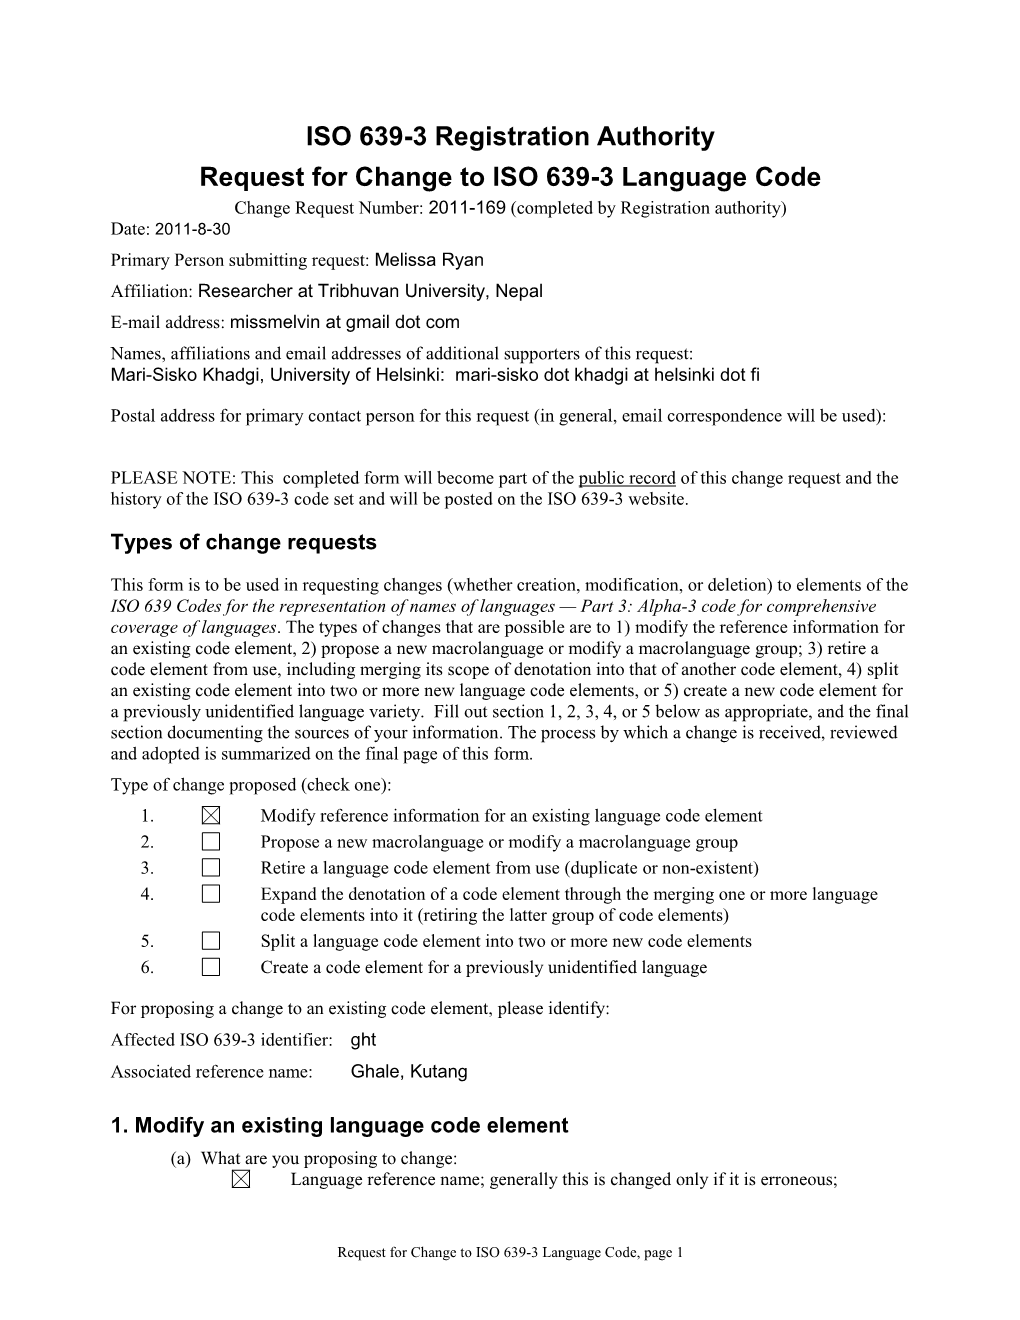 ISO 639-3 Registration Authority Request For